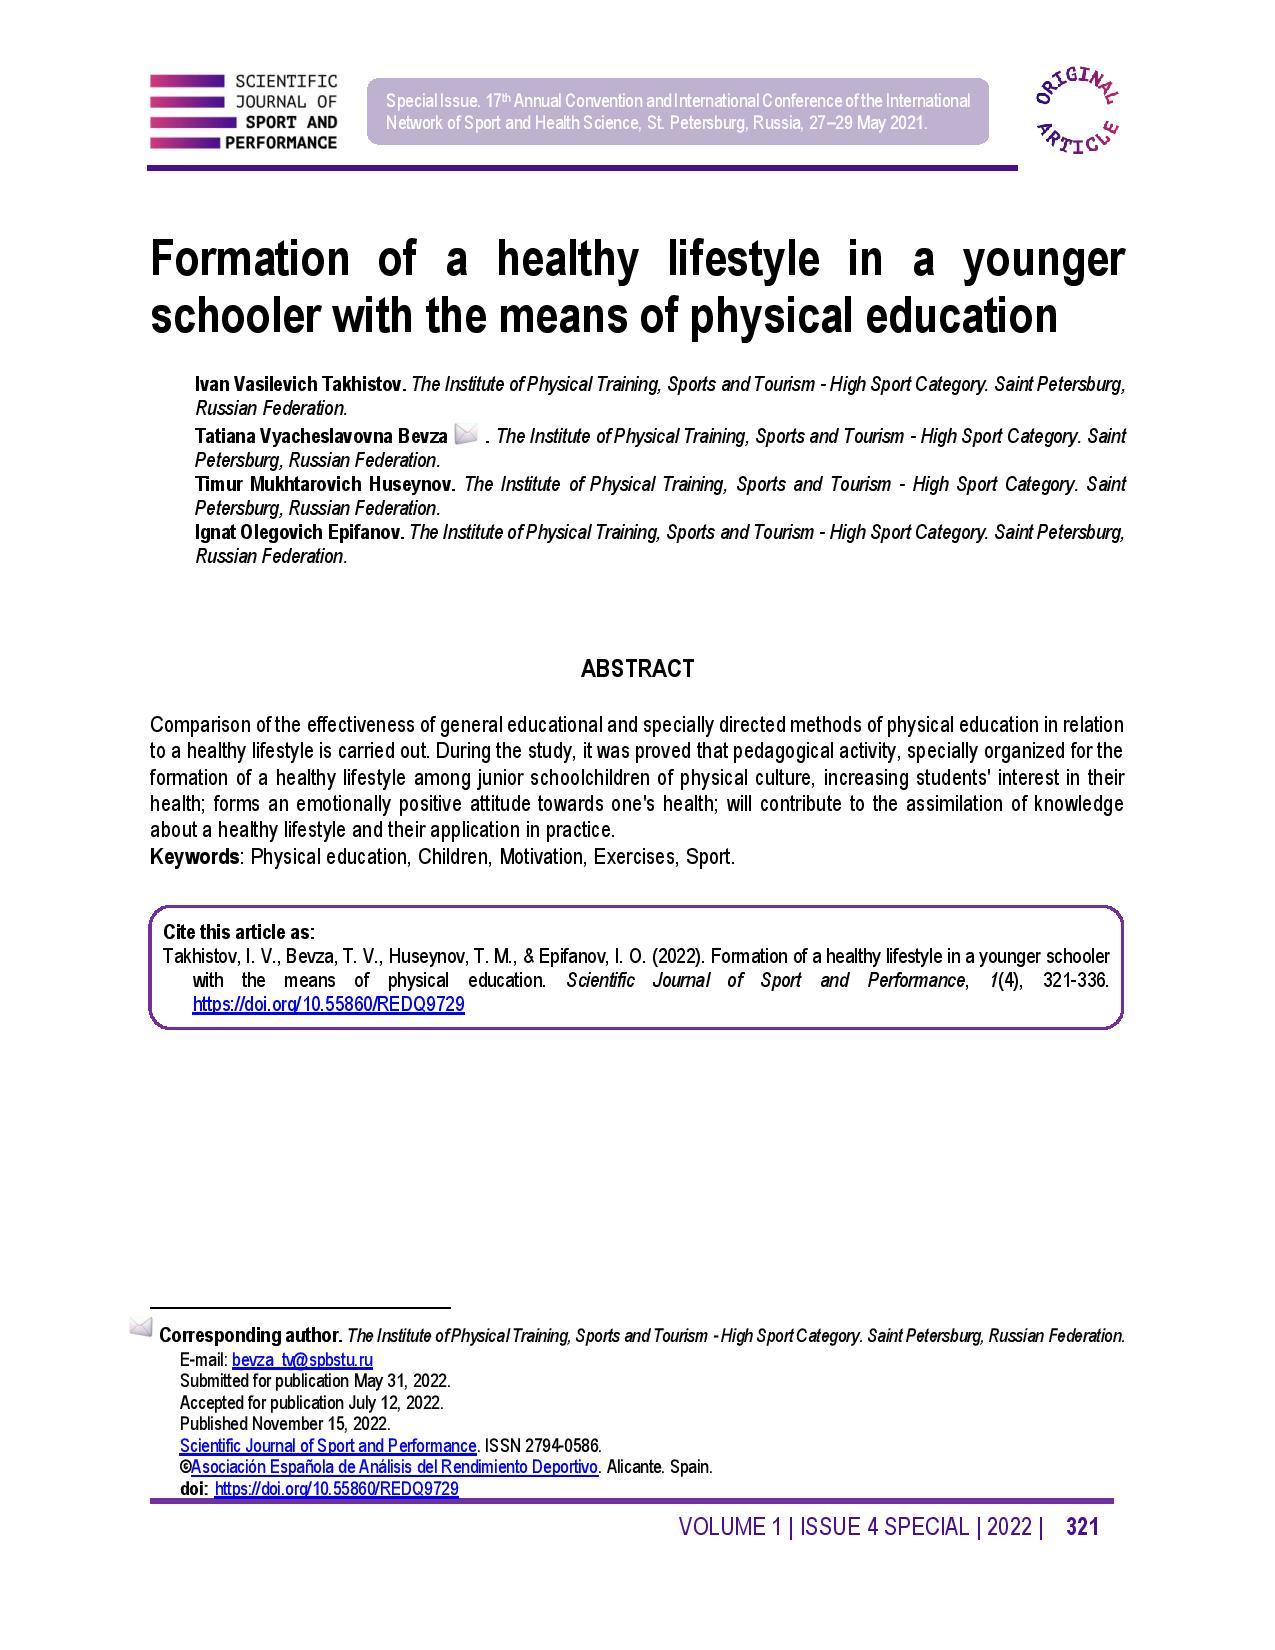 Formation of a healthy lifestyle in a younger schooler with the means of physical education